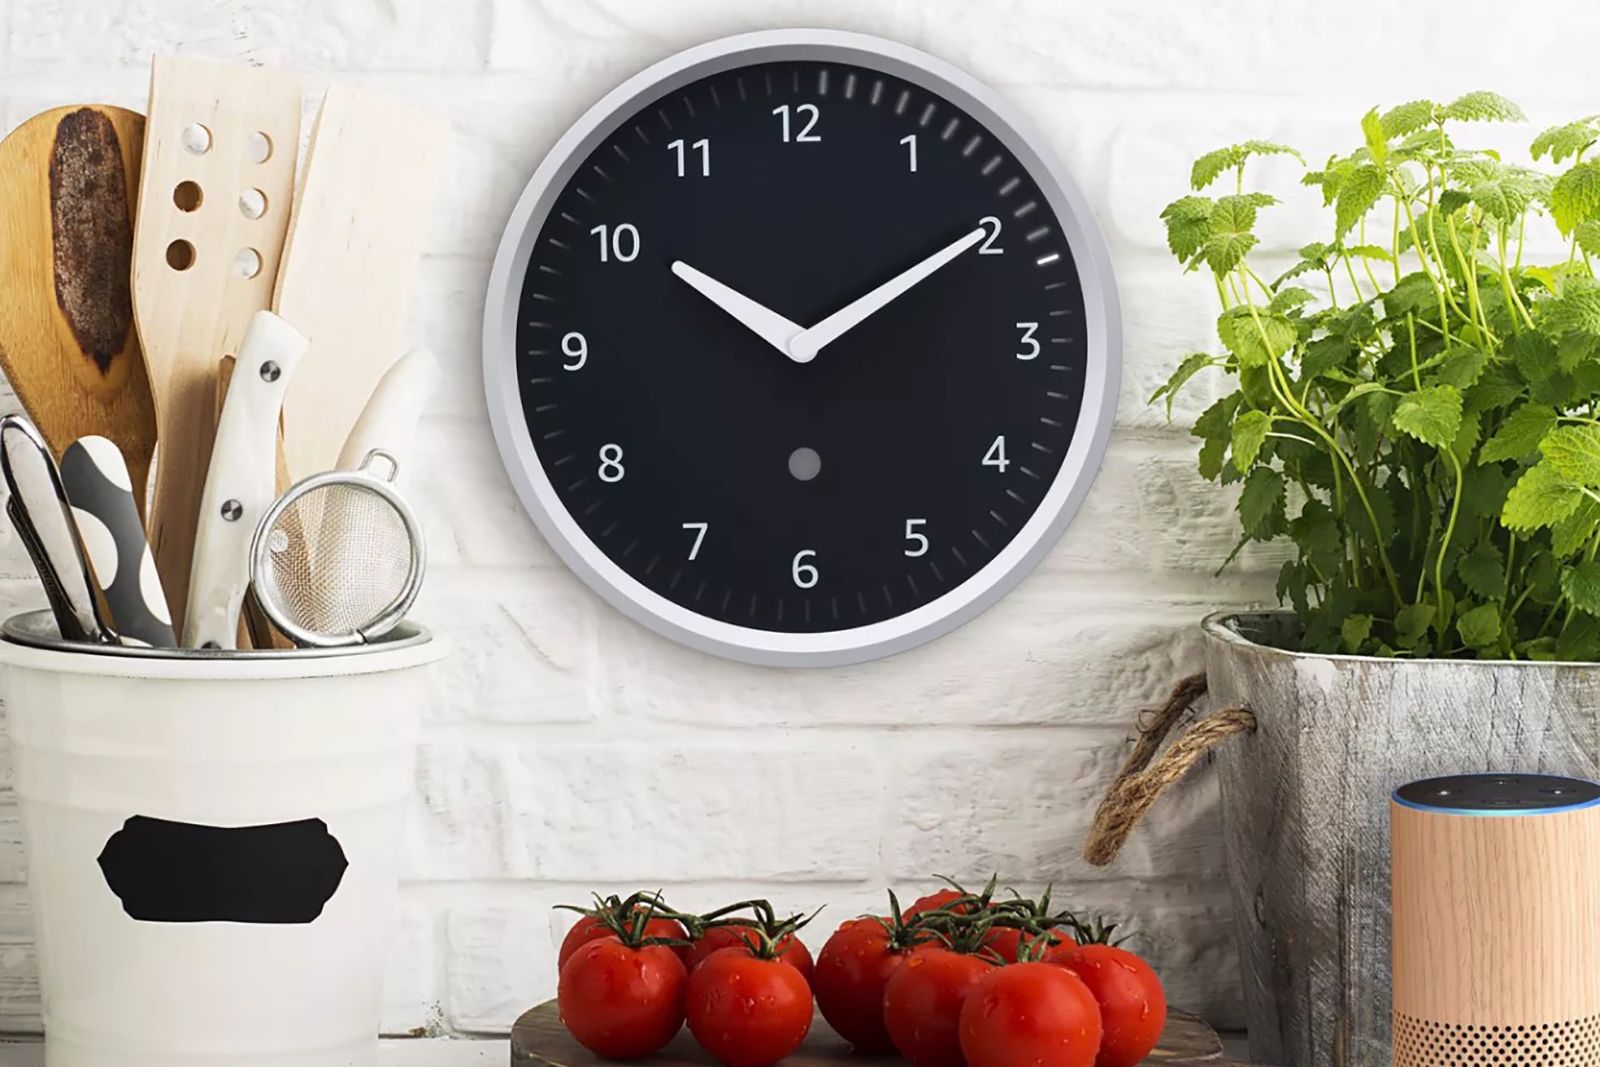 Amazon trots out an Echo Wall Clock and Microwave seriously image 1